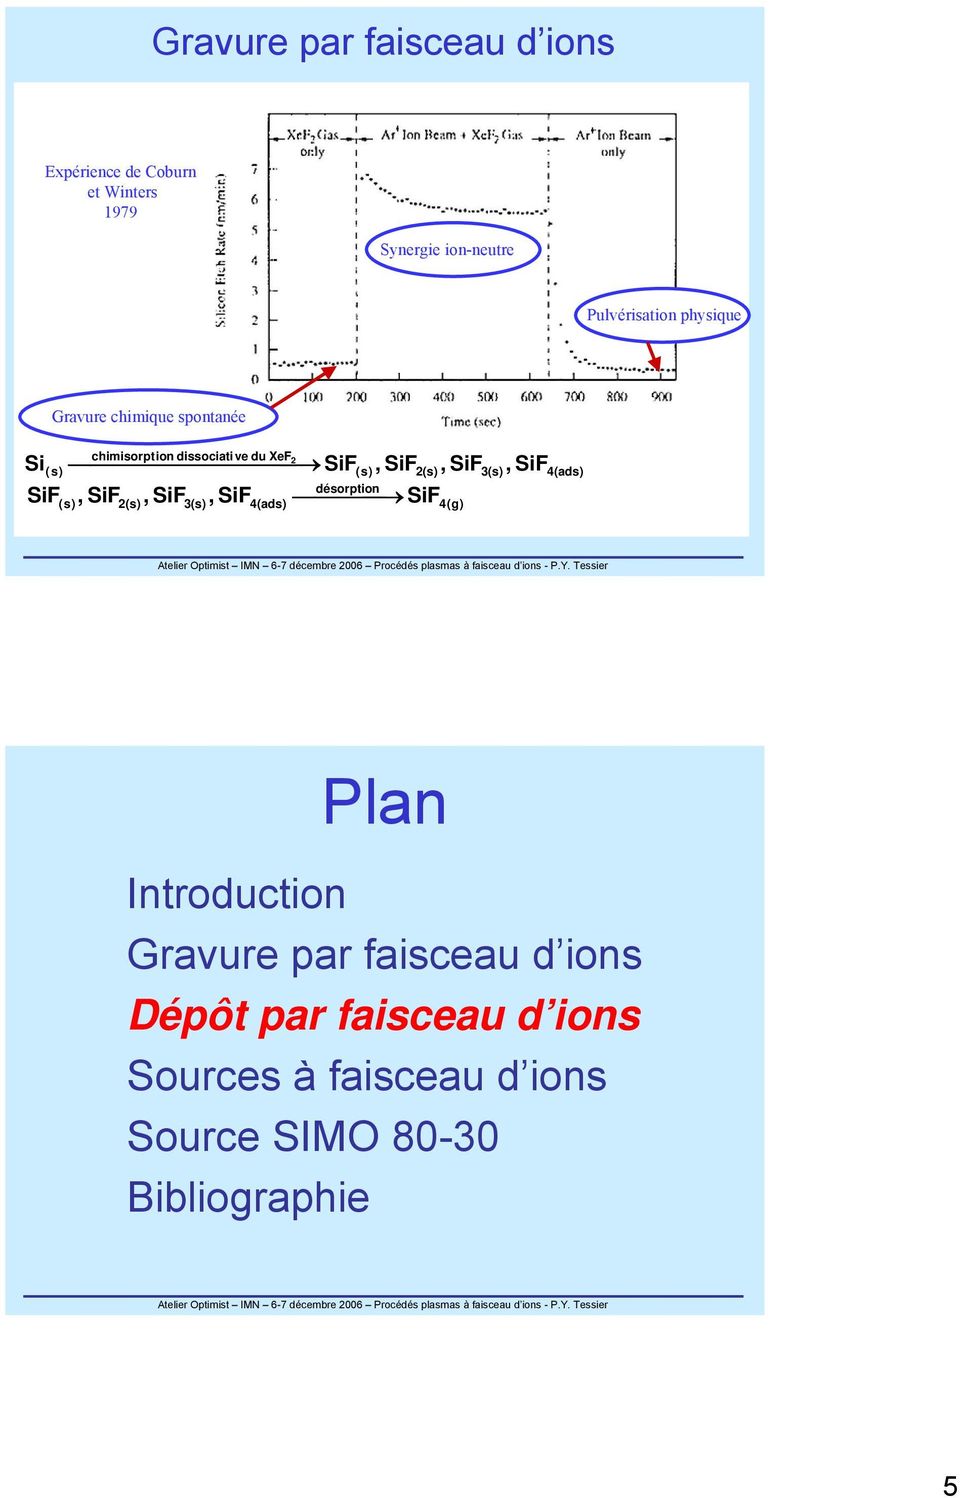 SiF3(s), SiF4(ads) désorption ( s), SiF2(s), SiF3(s), SiF4(ads) SiF4(g) SiF Plan Introduction